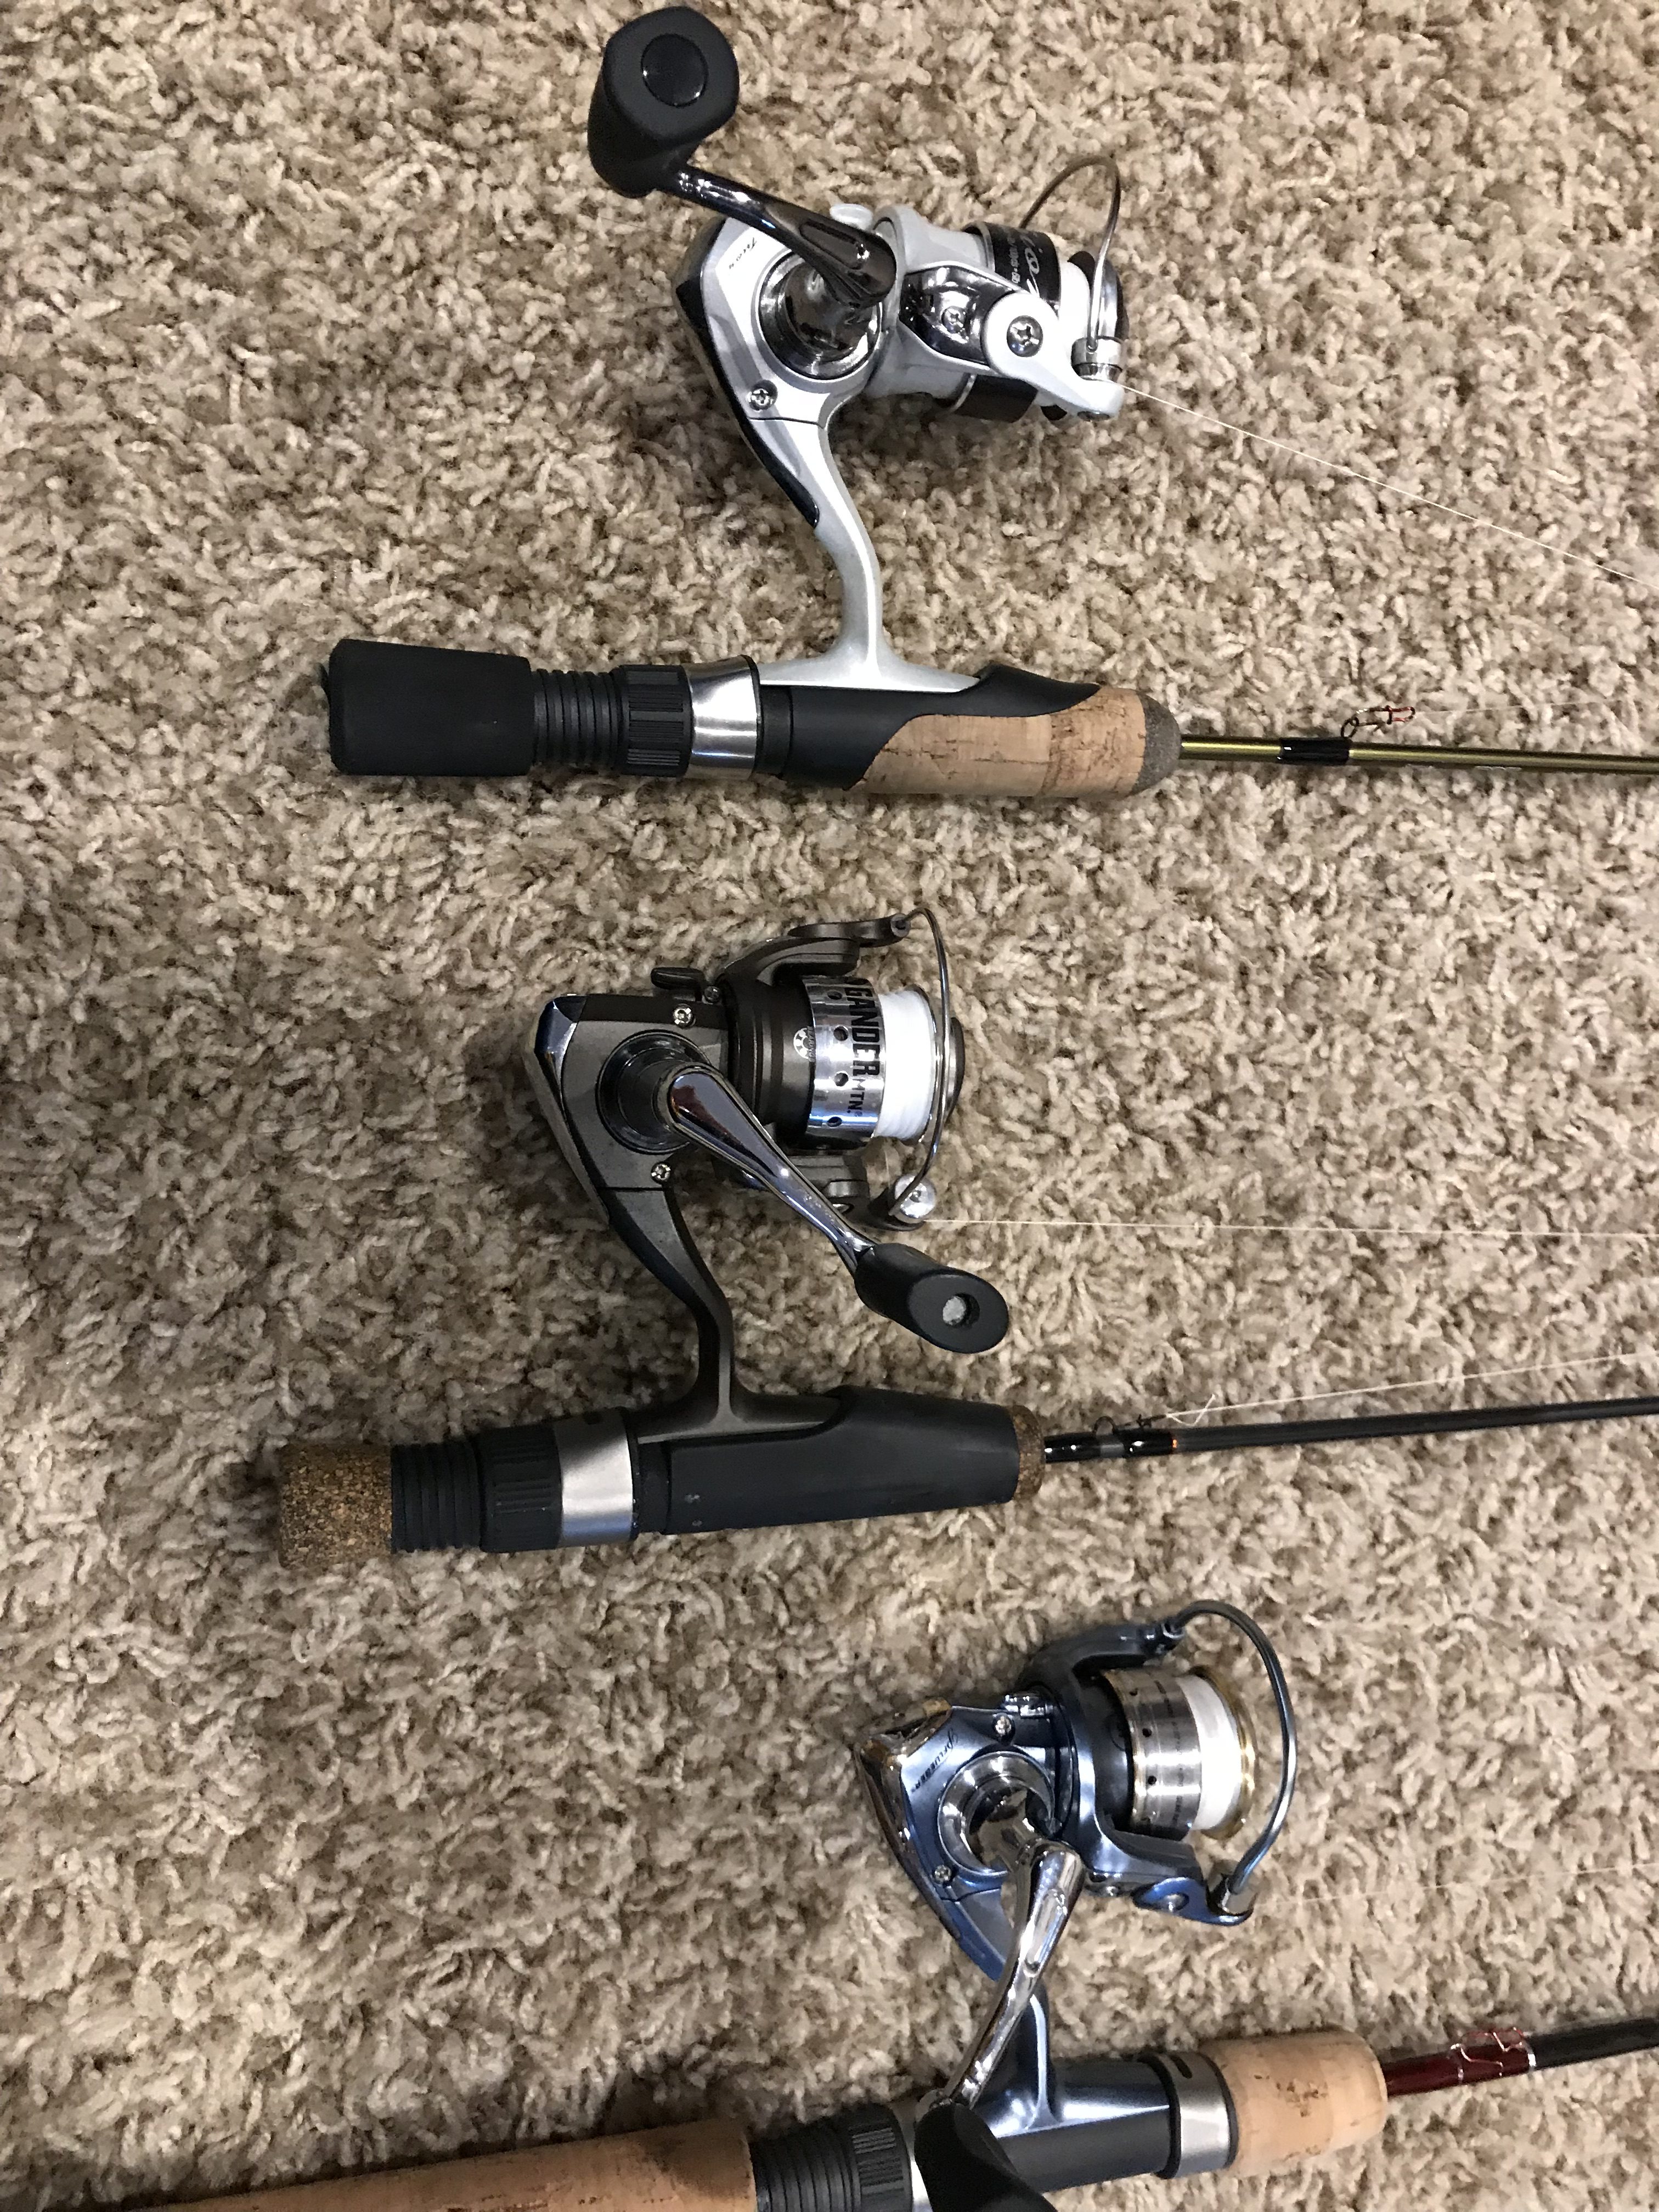 Thorne Brothers and Scheels Ice Rod/Reel Combos - Classified Ads